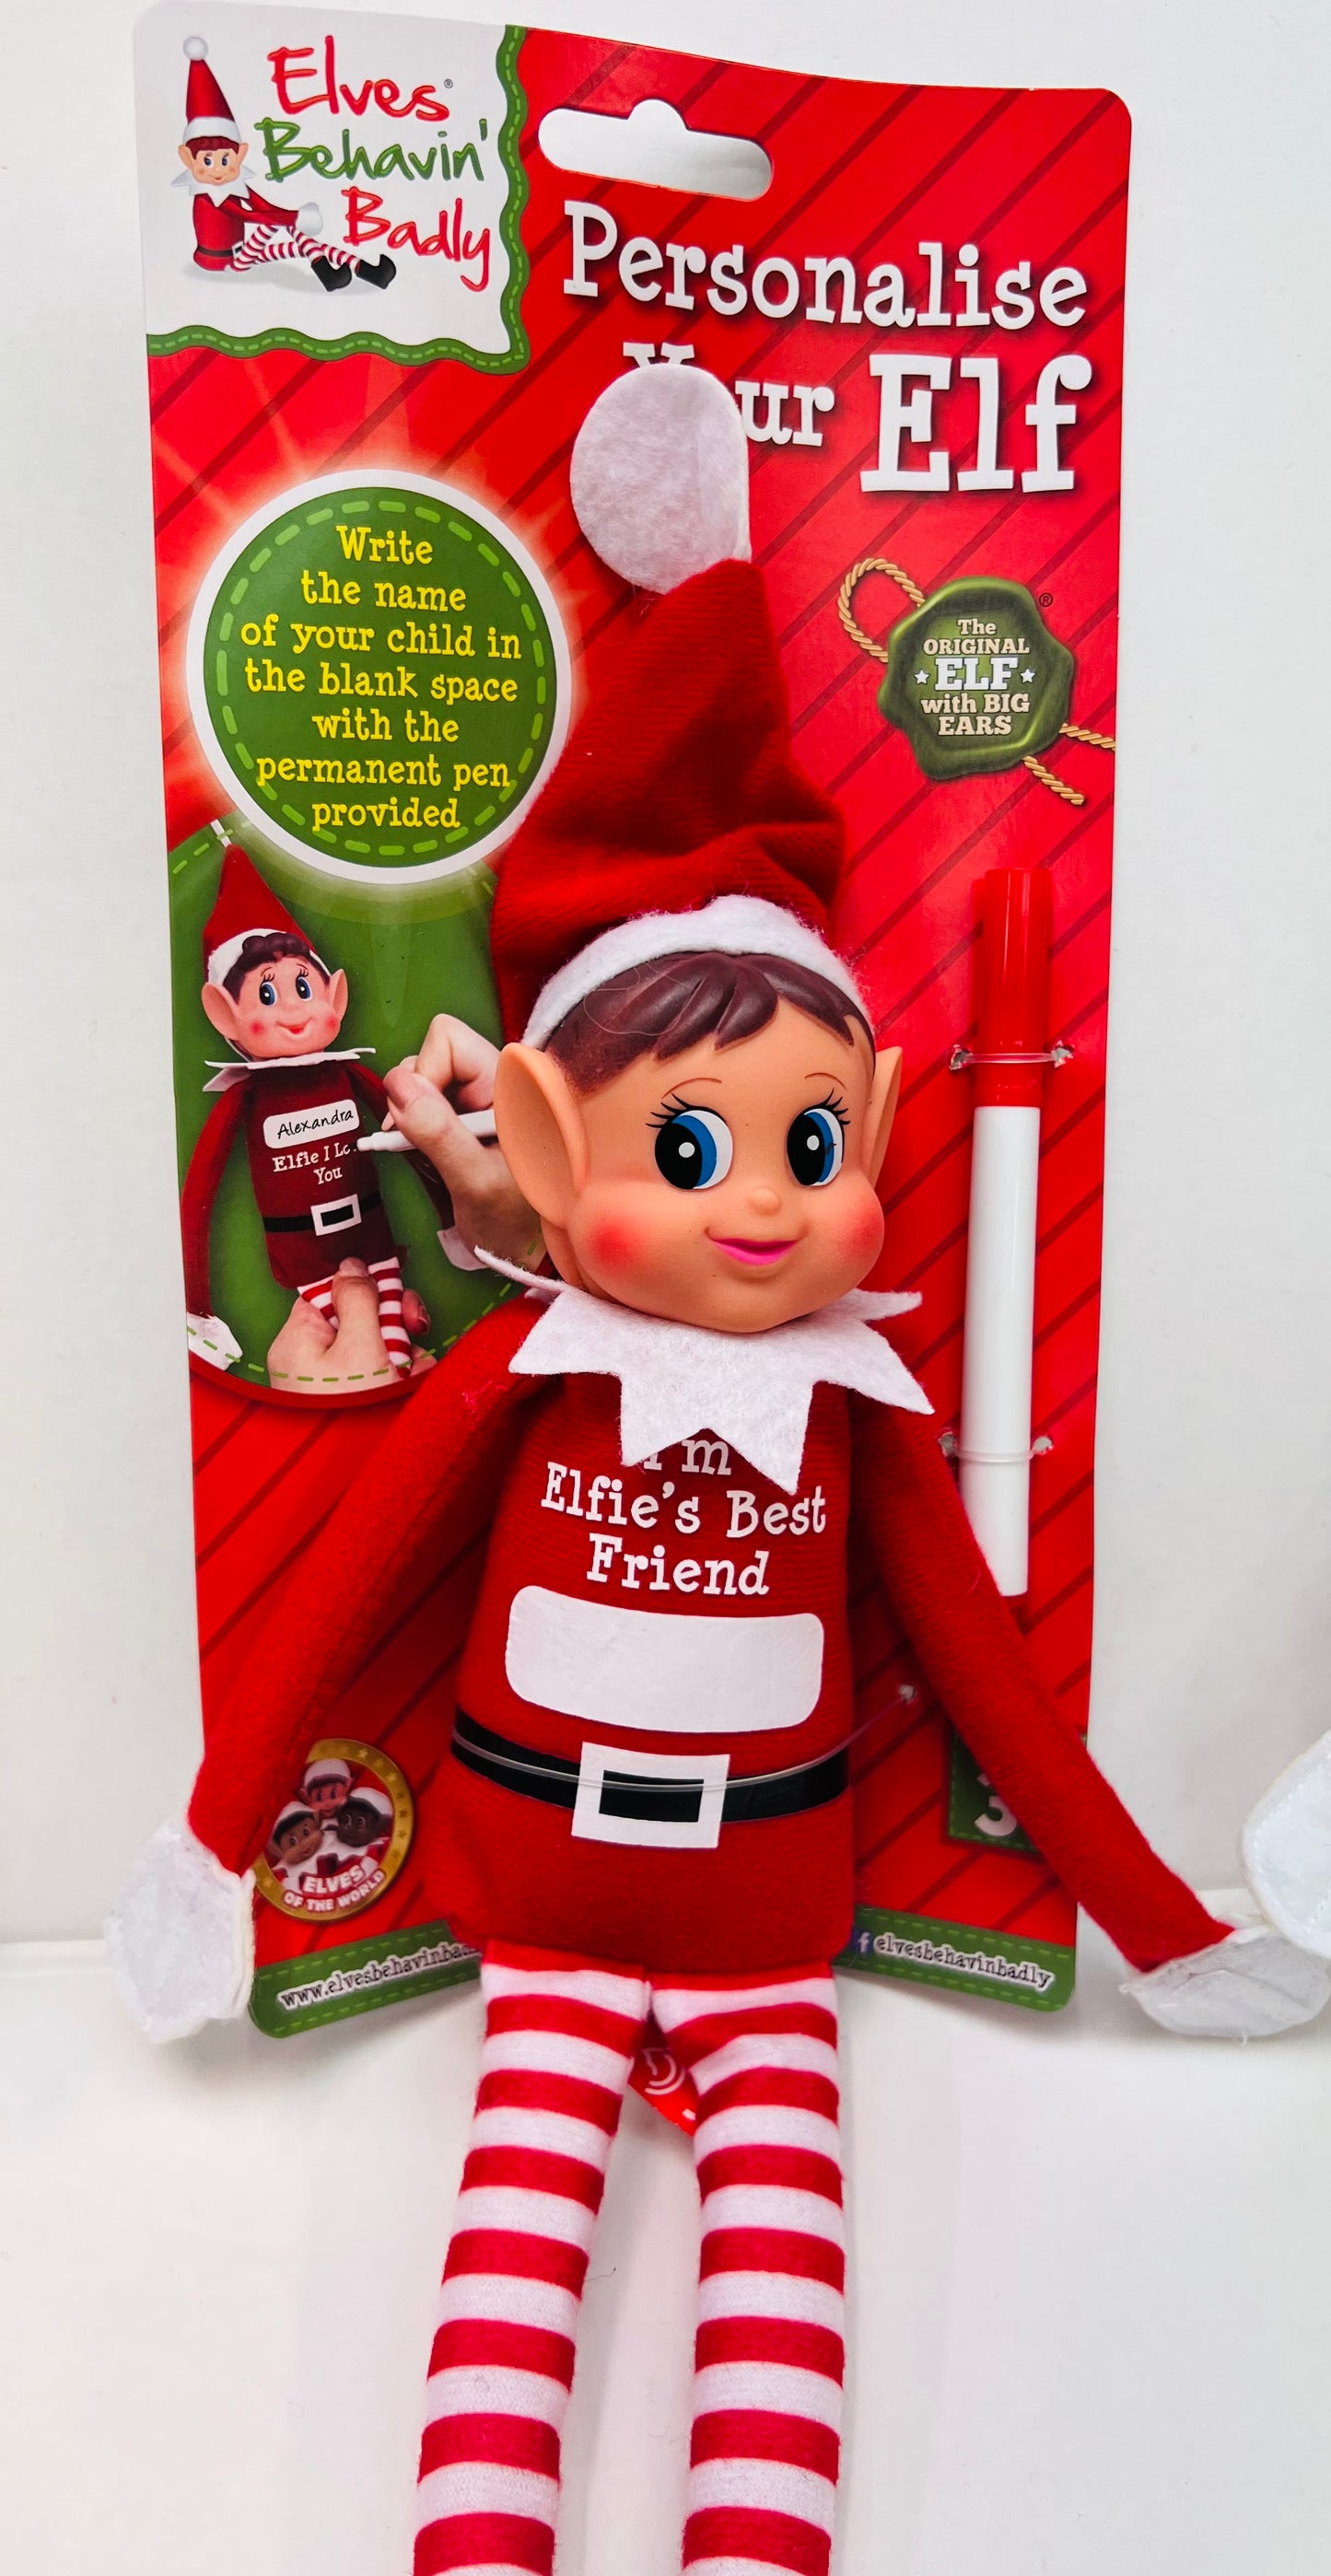 Personalise your Elf